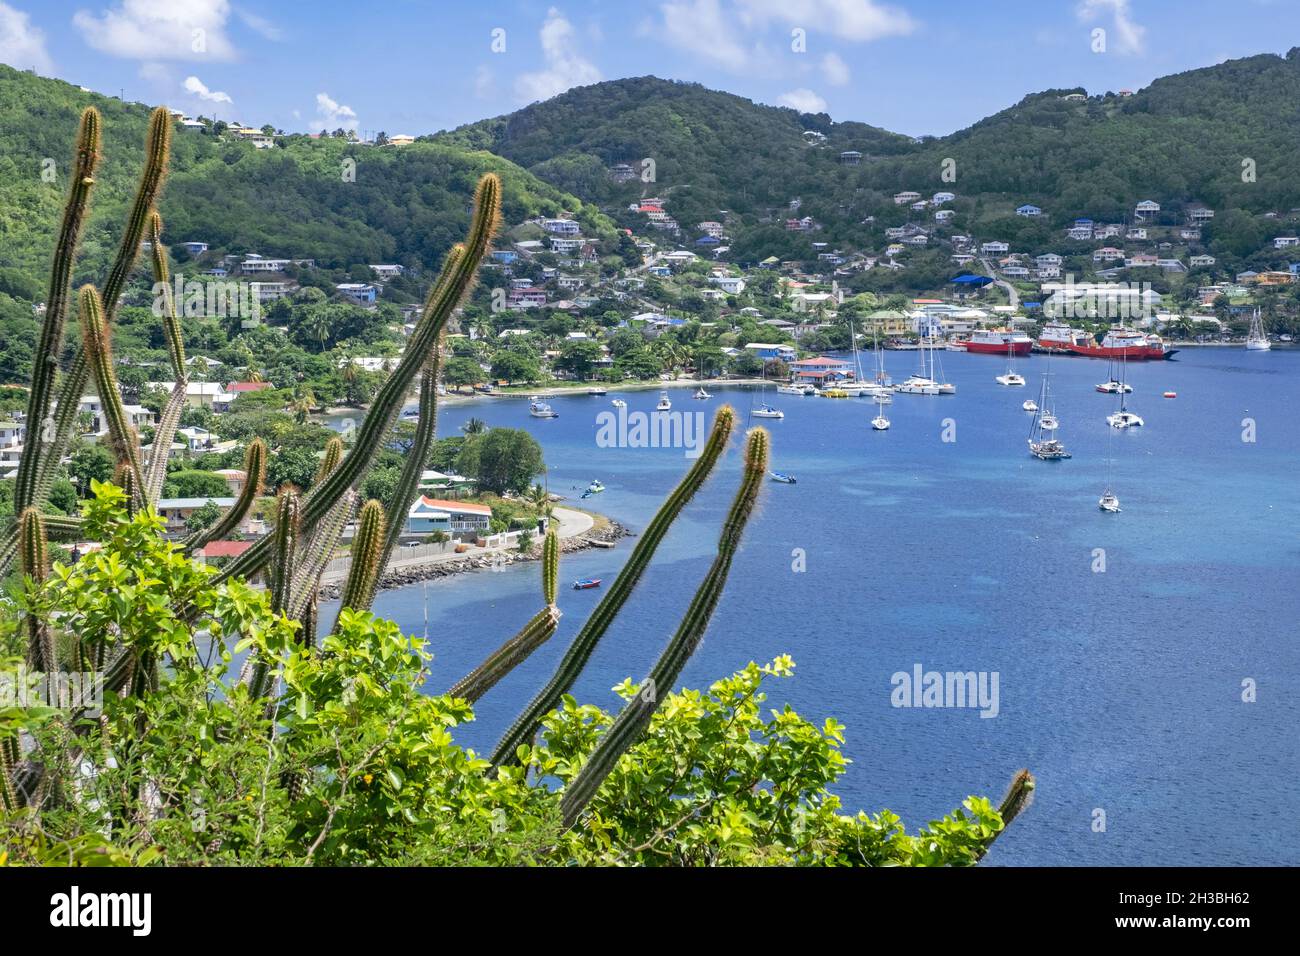 View over the bay and capital town Port Elizabeth on the island Bequia, part of the nation of Saint Vincent and the Grenadines in the Caribbean Sea Stock Photo